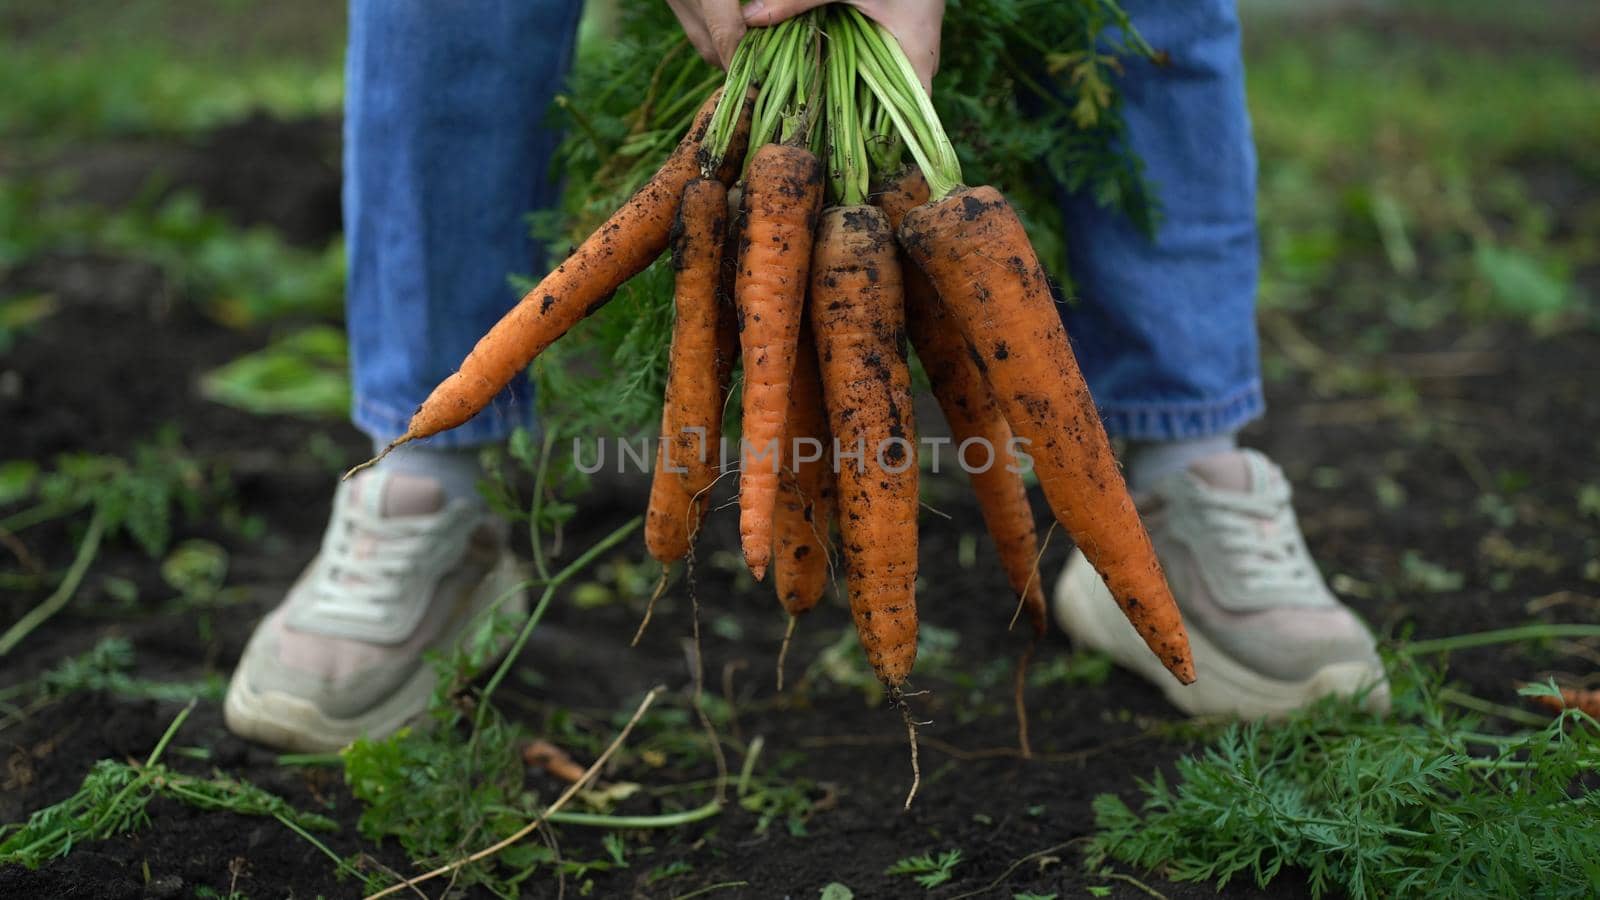 A young woman gathers carrots in her hands in the garden and holds a bunch of carrots by the tops by Petrokill